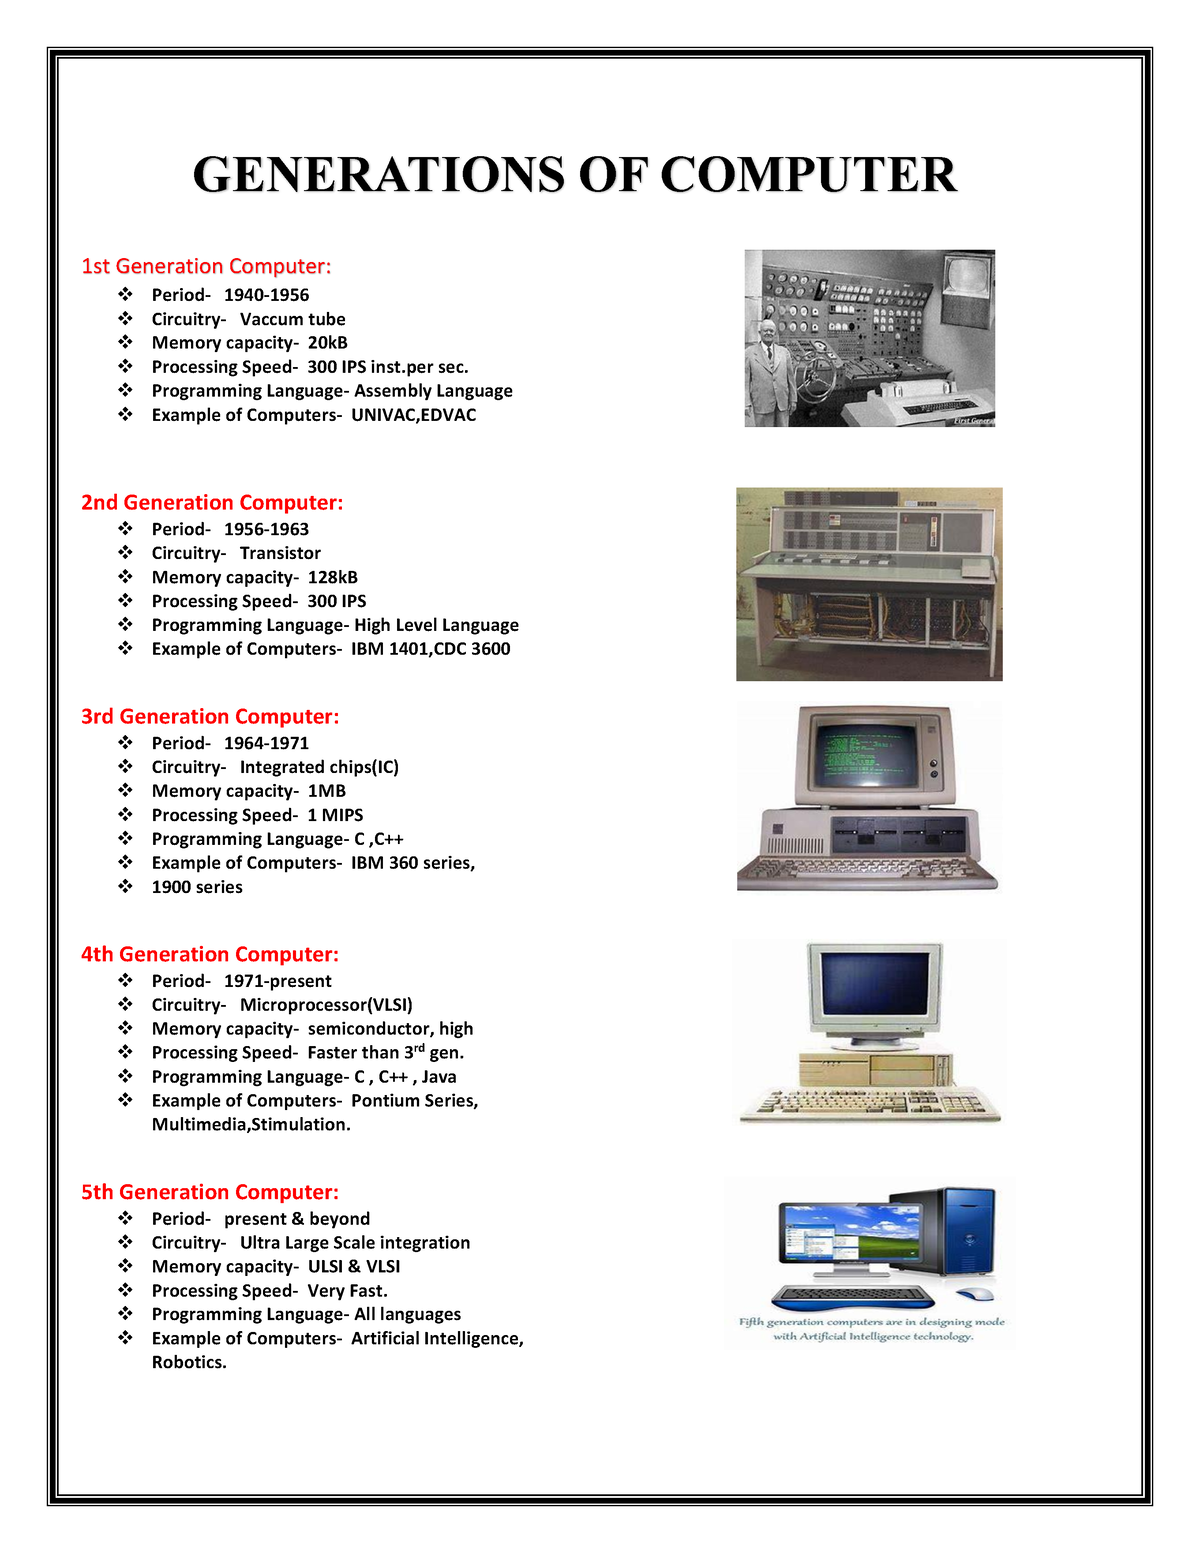 Generation of Computer 1st to 5th - Webeduclick.com